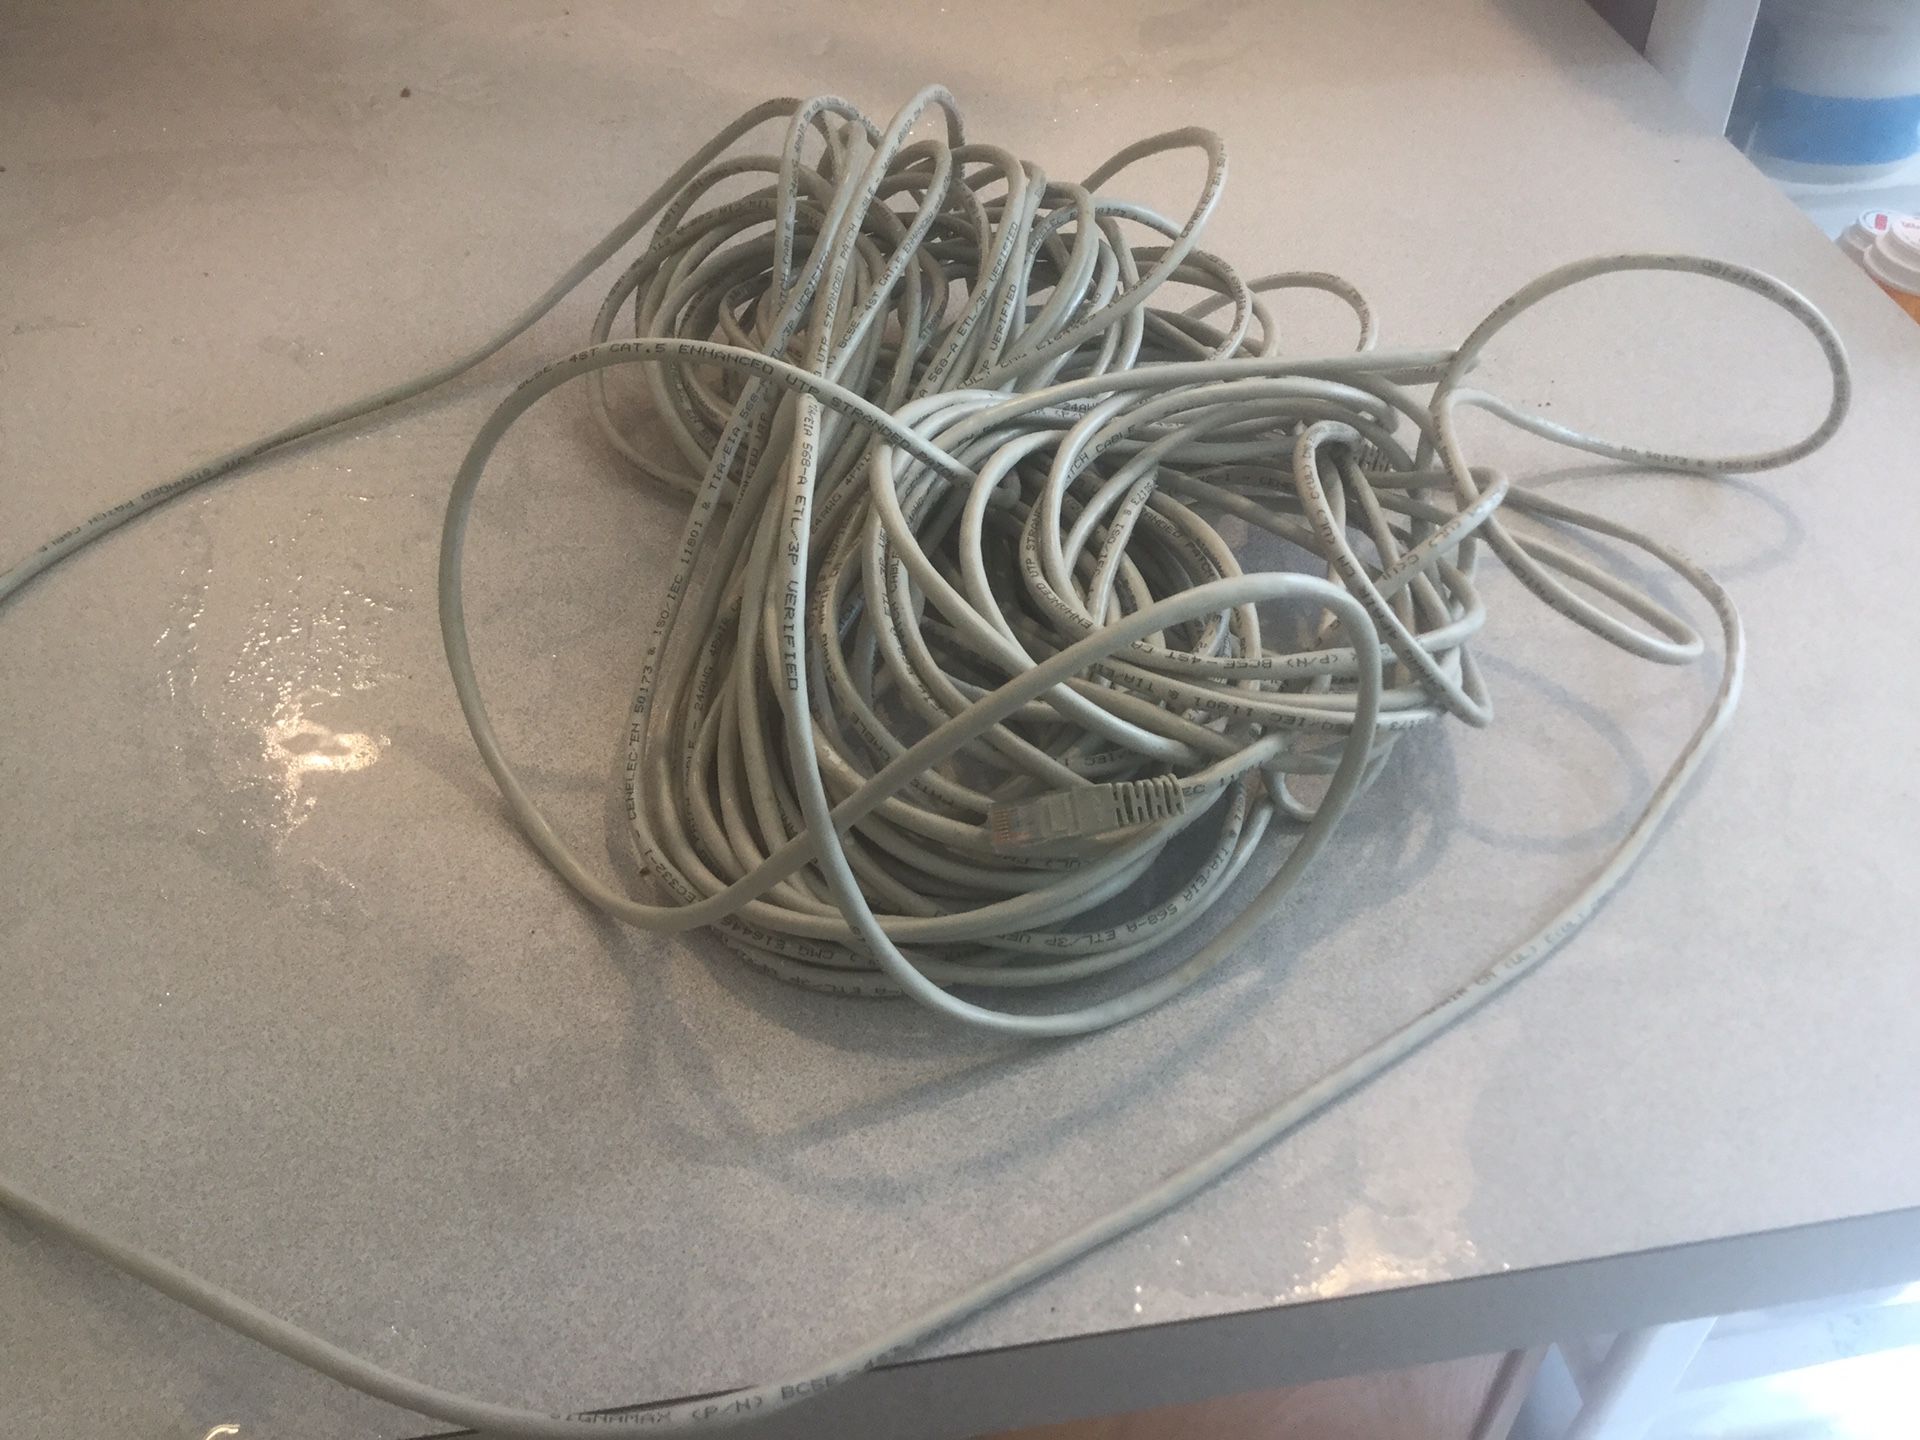 A long Ethernet cable. About 100 feet long